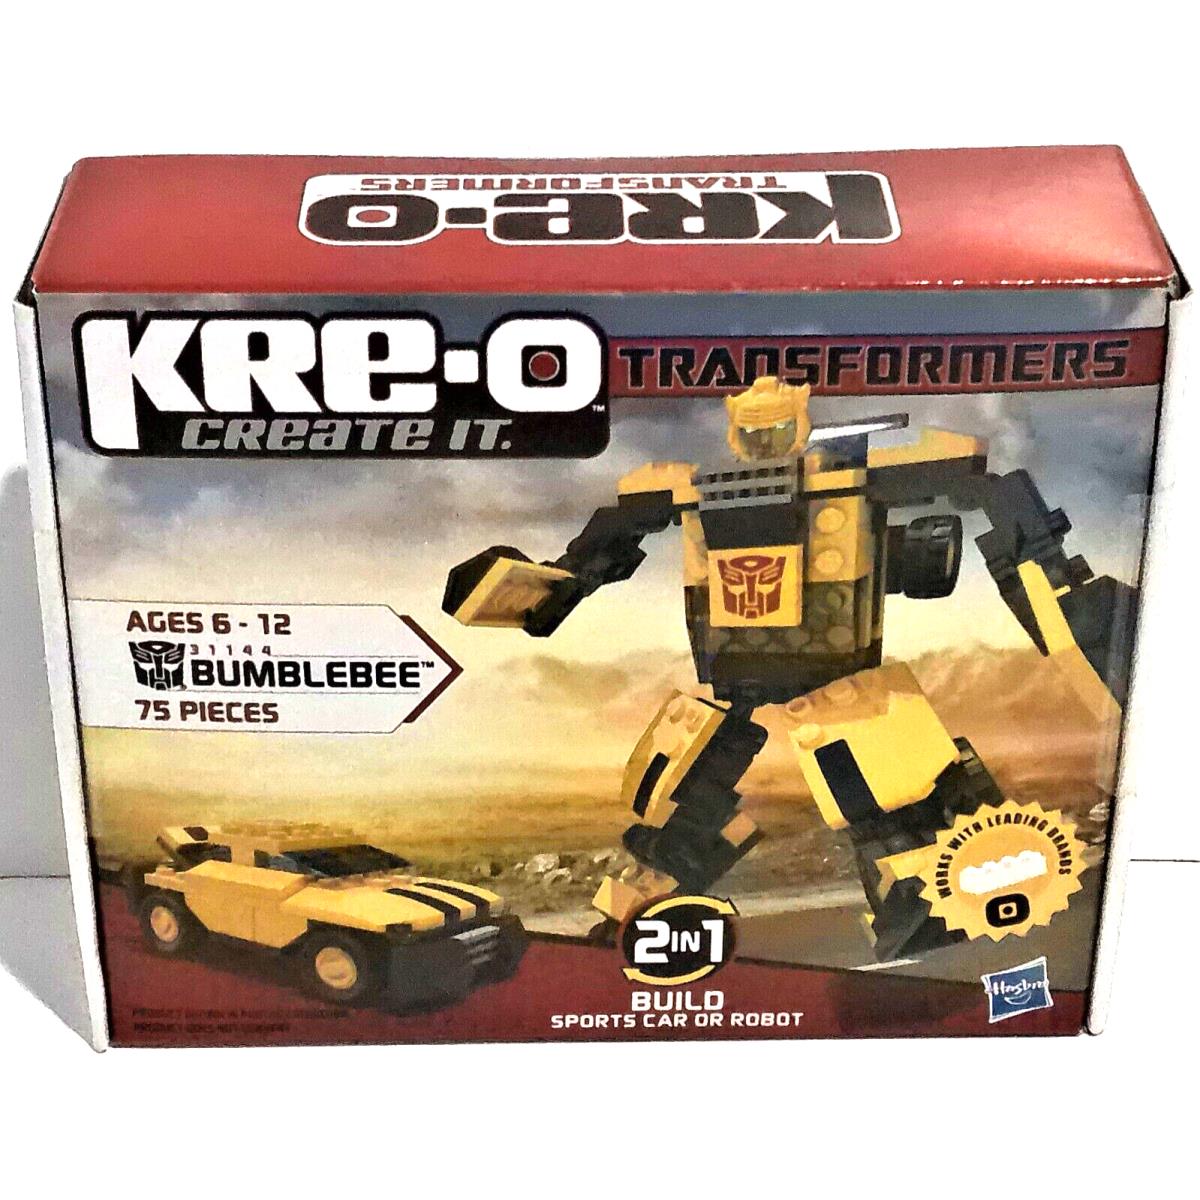 Kre-o Create IT Transformers 31144 Bumblbee Sports Car or Robot Misb